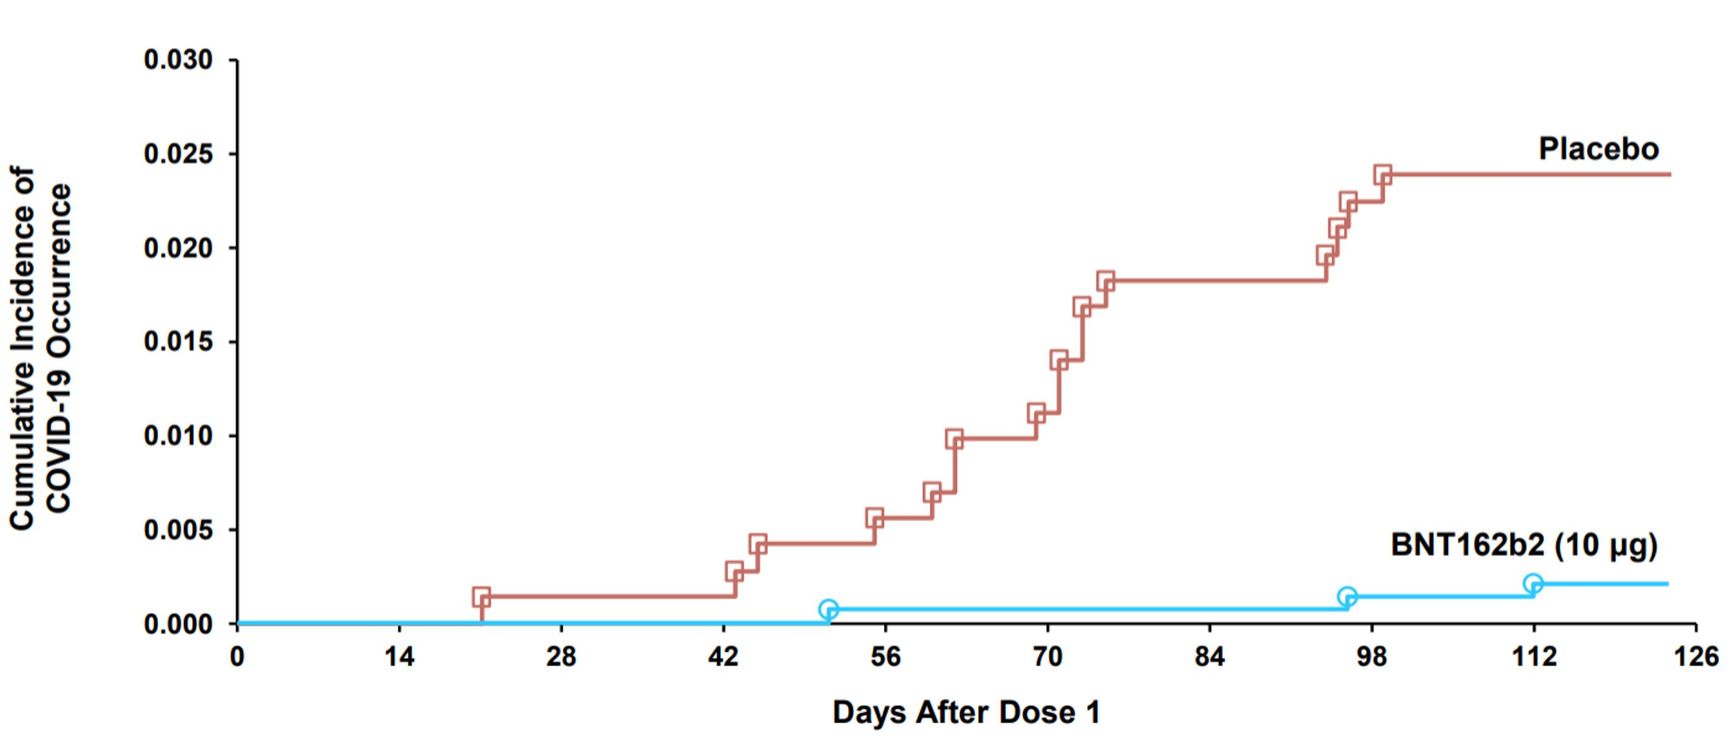 Figure 2. COVID-19 events accumulation curve after dose one in placebo and vaccine groups